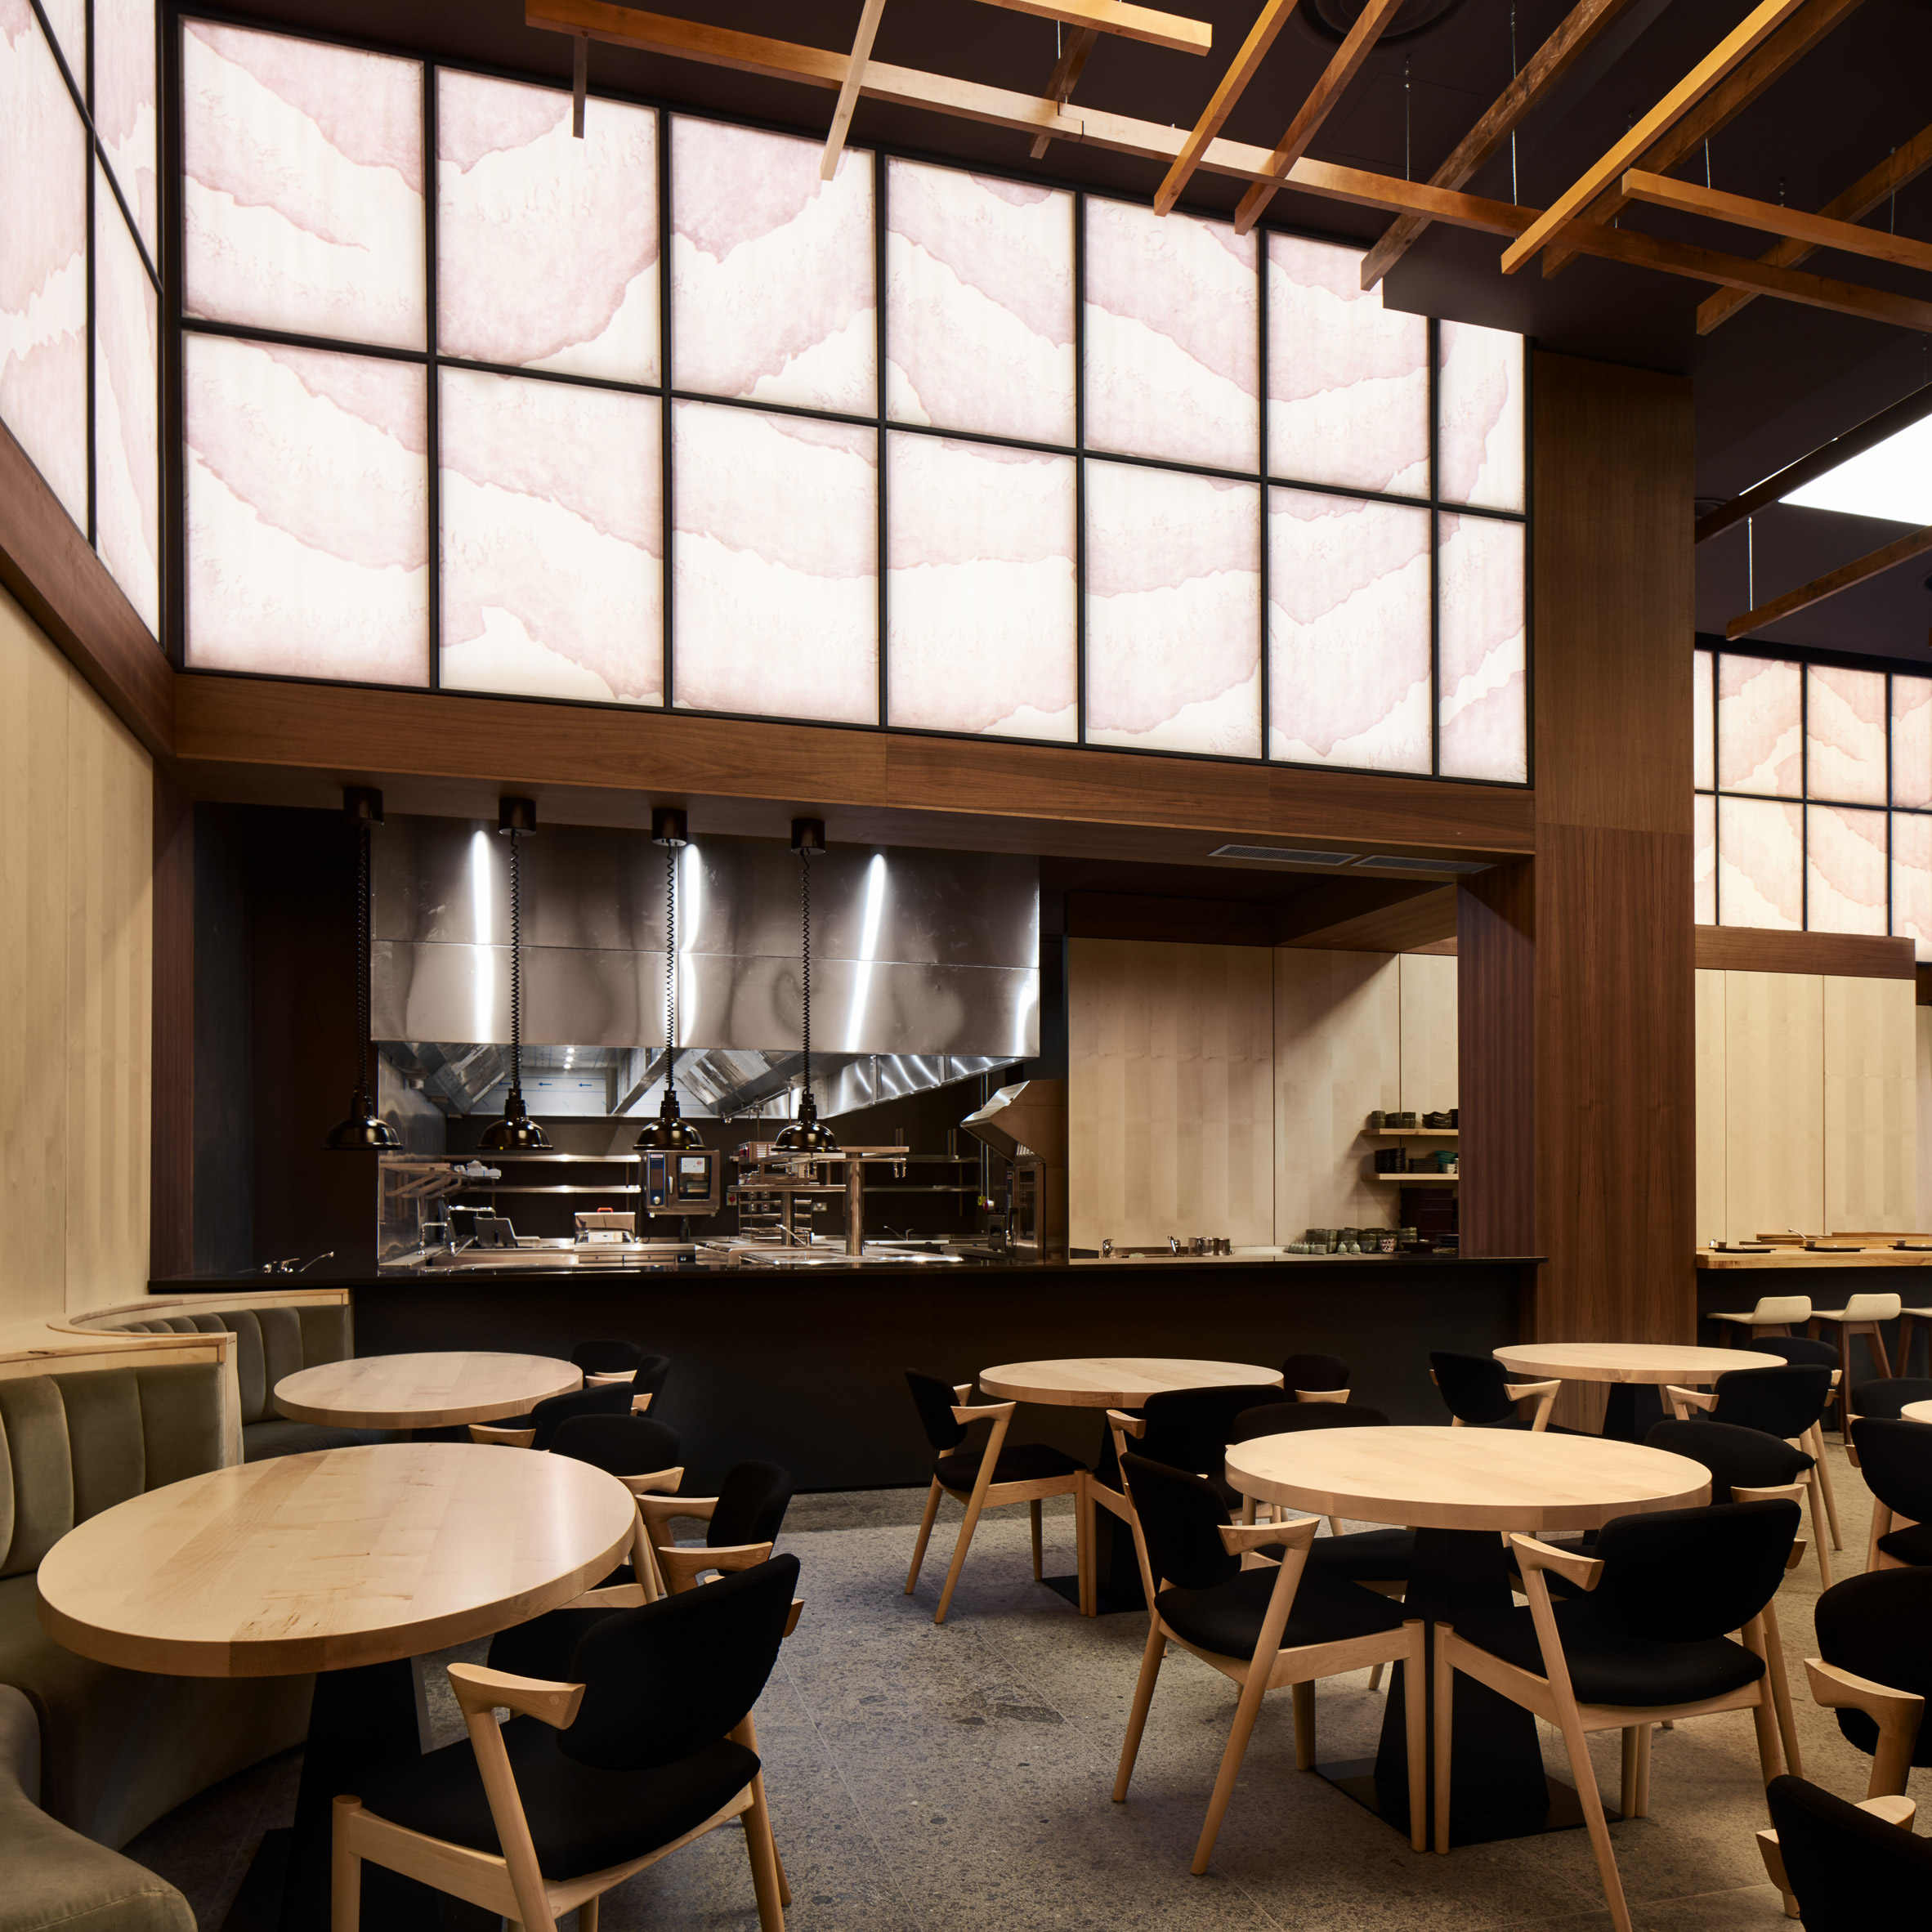 Sybarite bases Japanese restaurant interior on bamboo forests-19